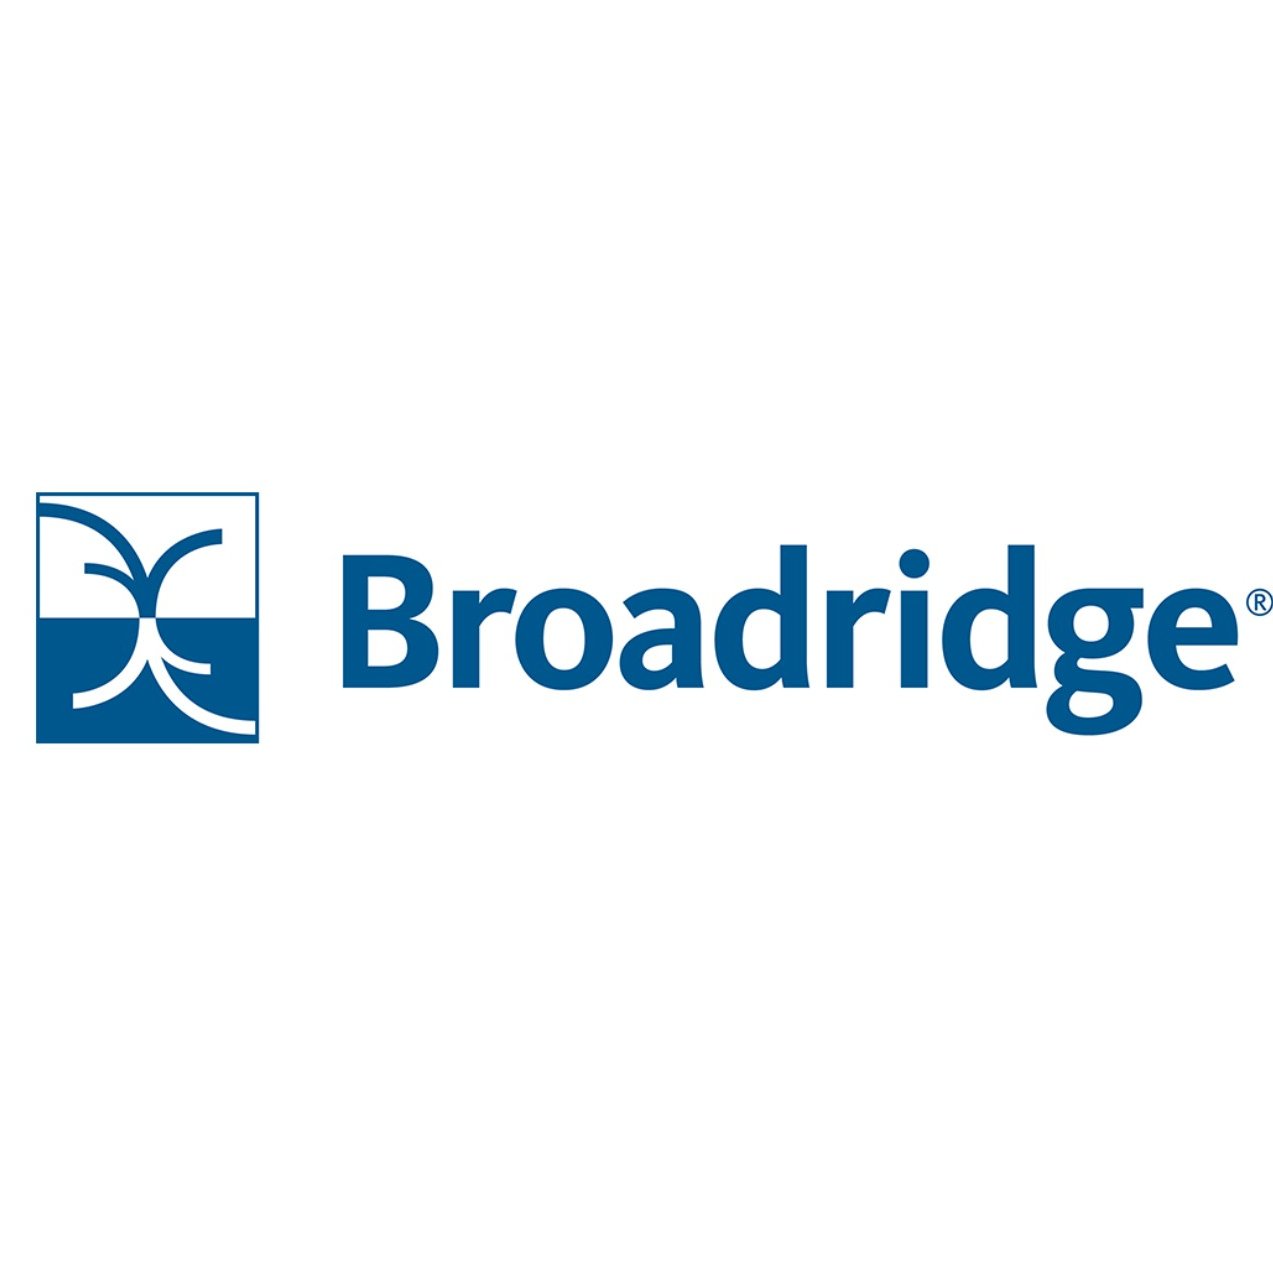 Broadridge, a S&P 500 global fintech leader with $5 billion in revenue, helps clients get ahead of today’s challenges to capitalize on what’s next.